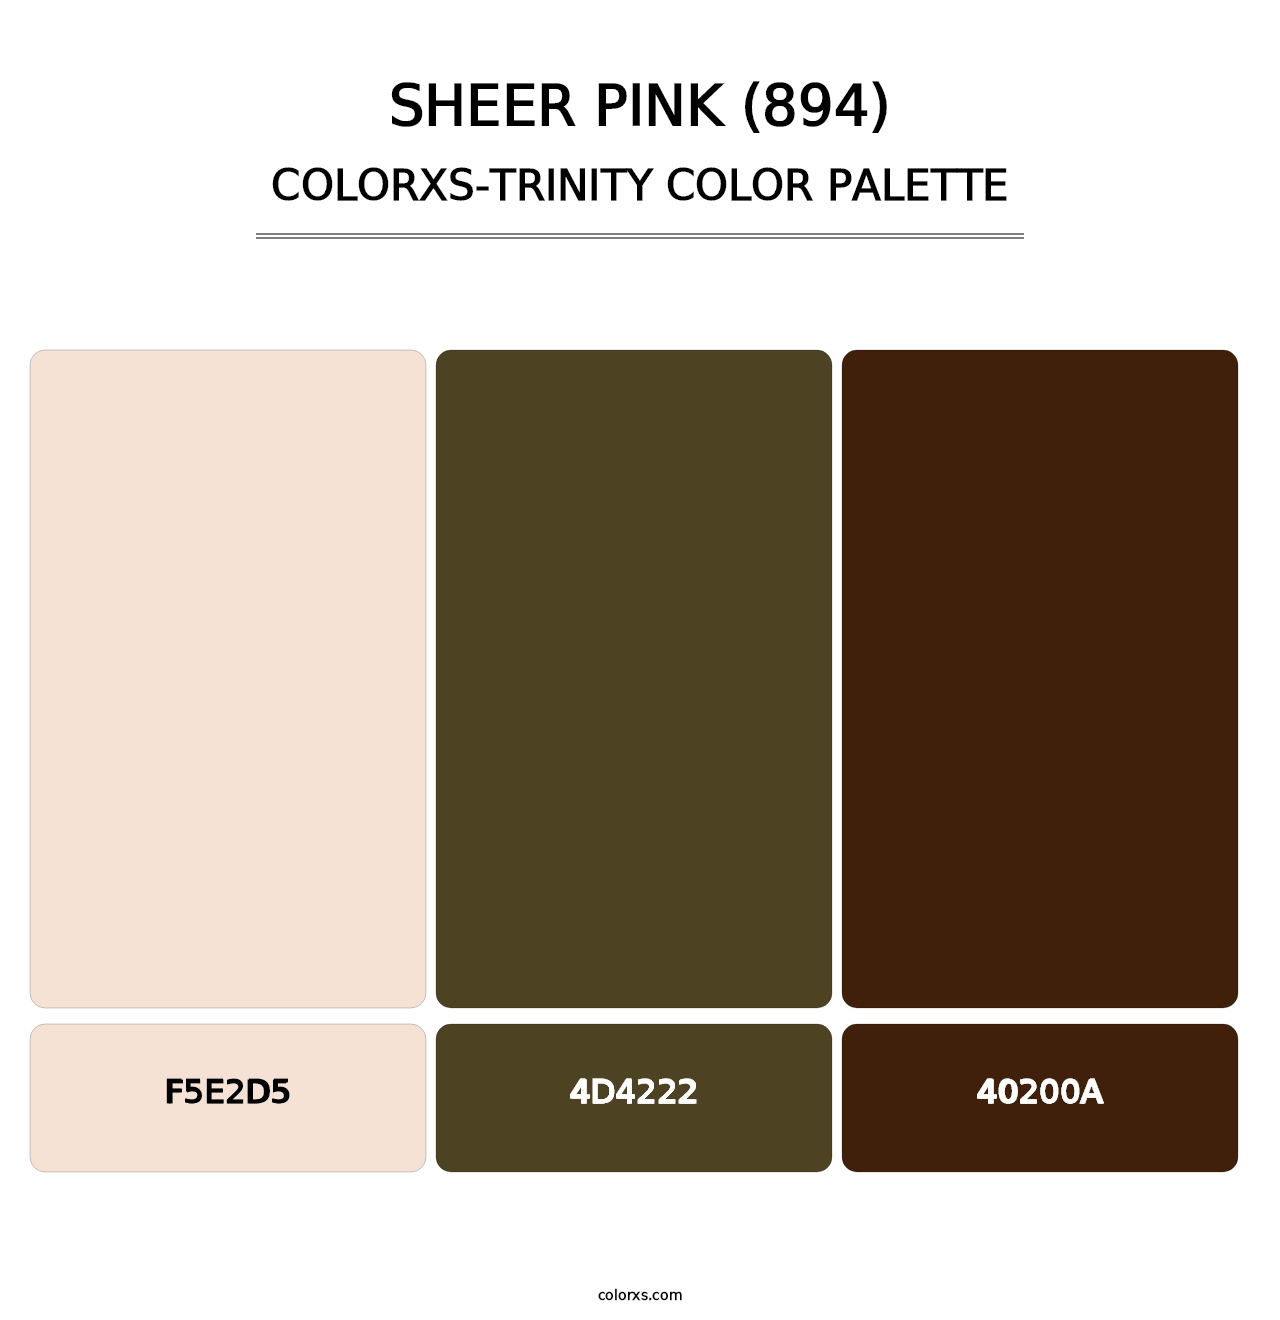 Sheer Pink (894) - Colorxs Trinity Palette